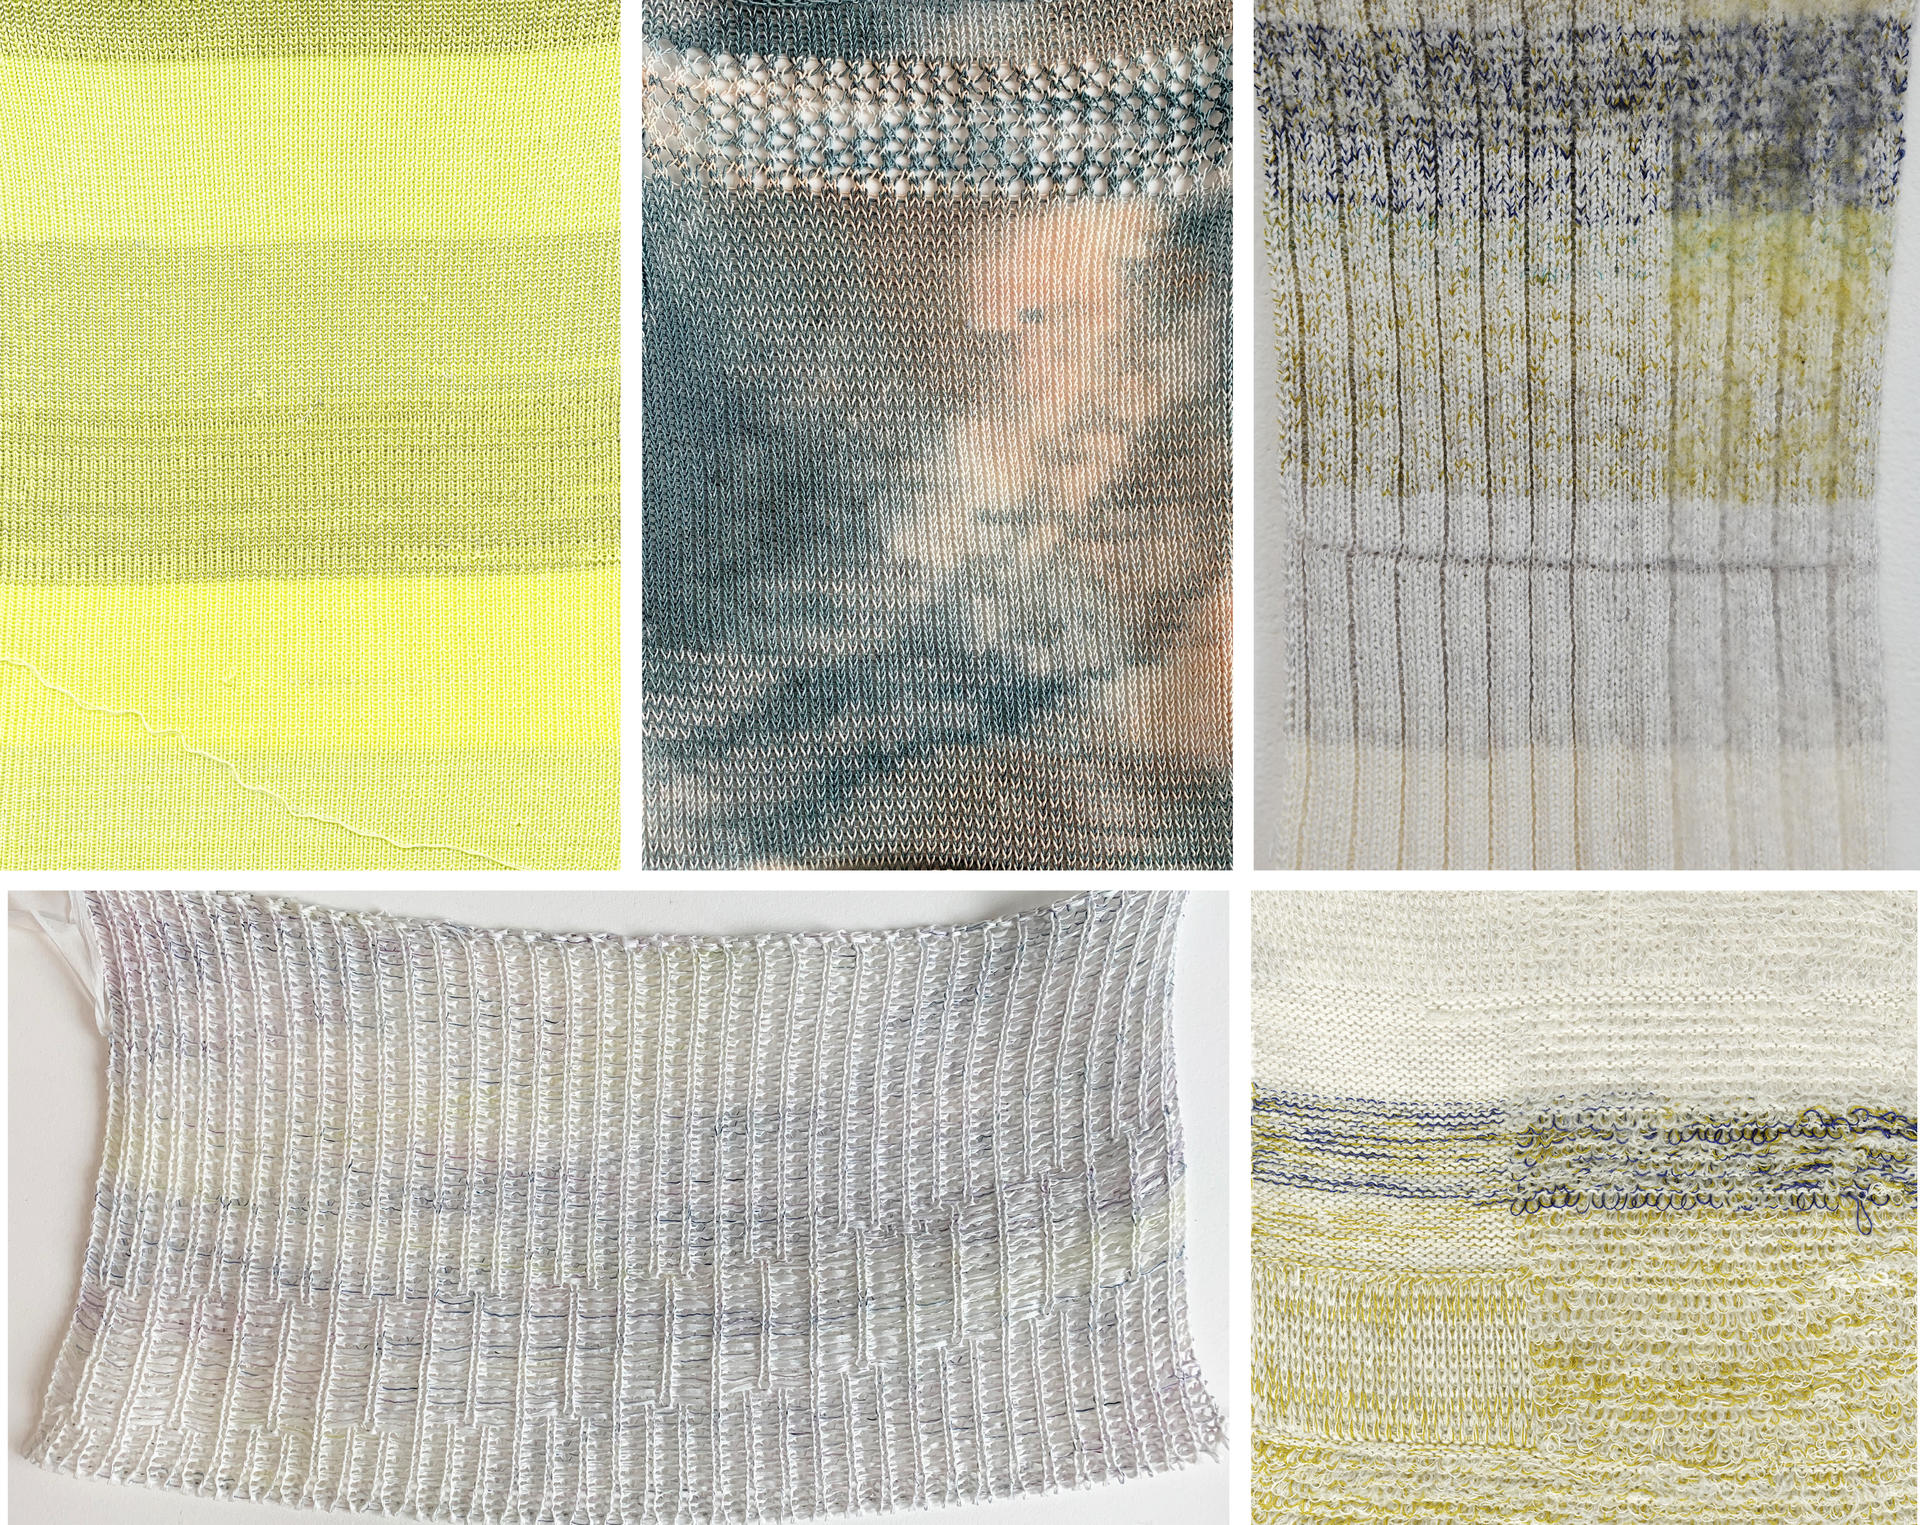 Six knitted samples varying in texture and color. 